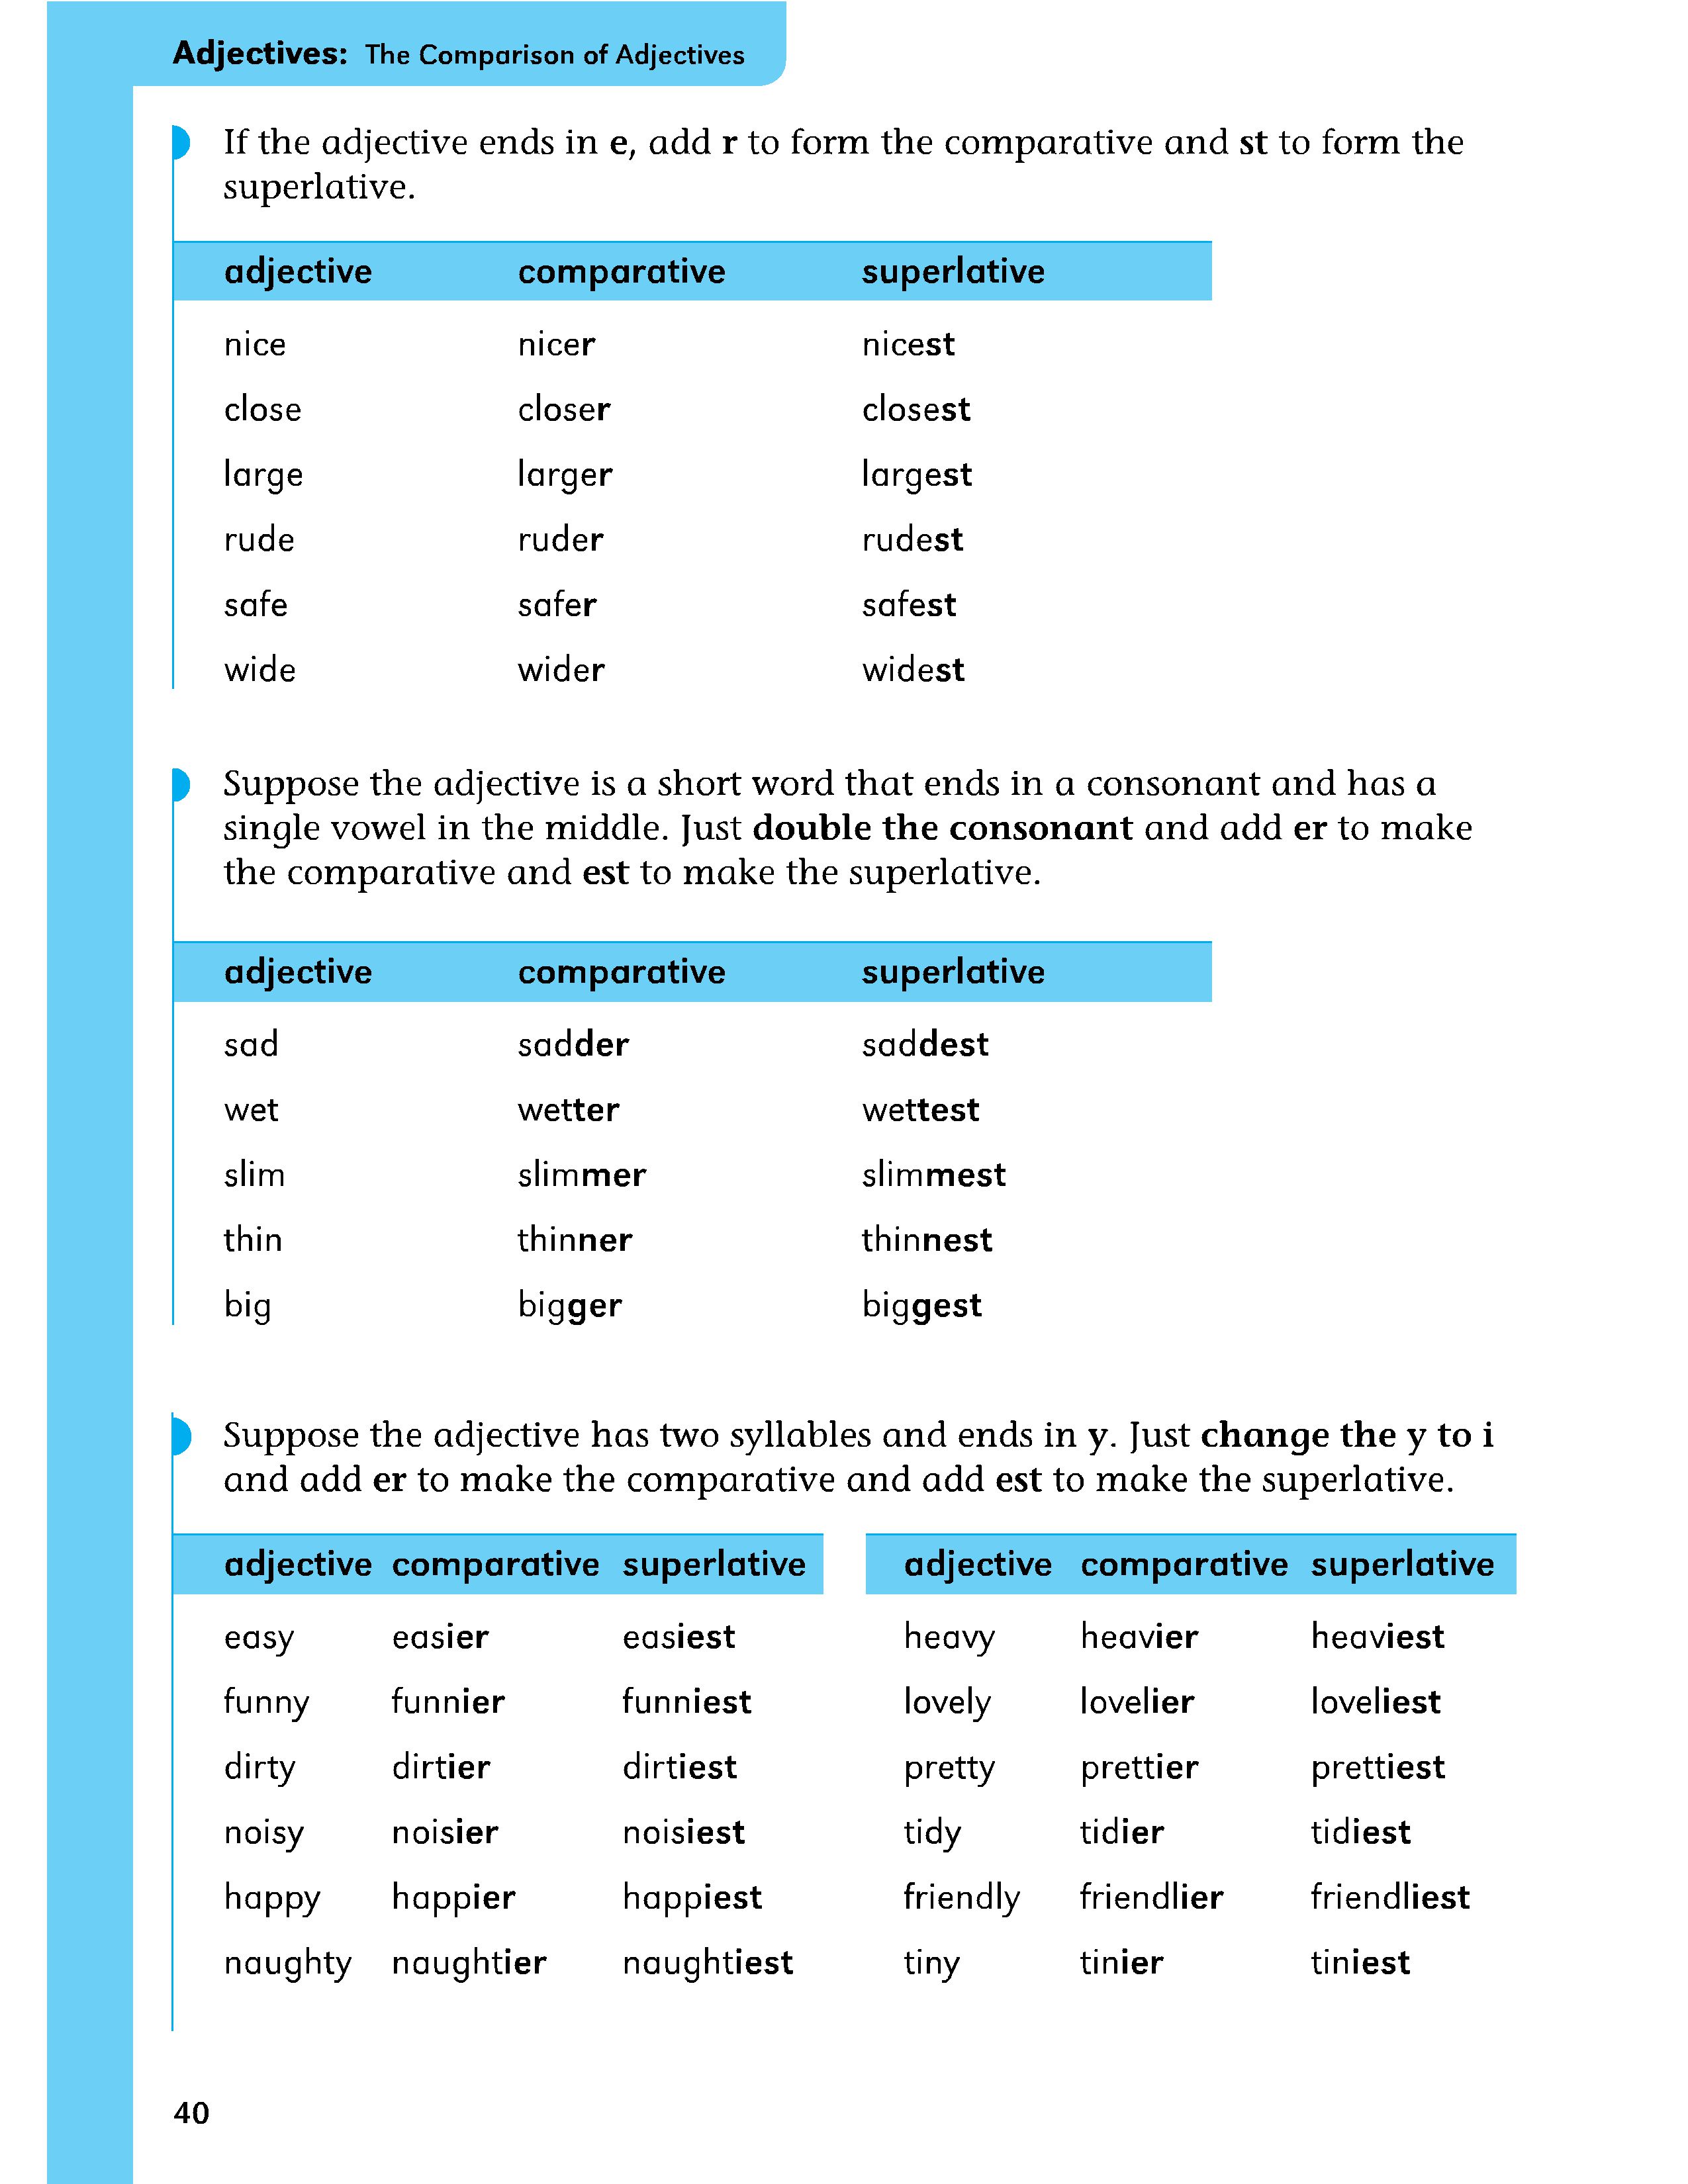 Comparative quiet. Comparatives and Superlatives формы. Easy Comparative and Superlative. Таблица Comparative and Superlative. Adjective Comparative Superlative таблица.